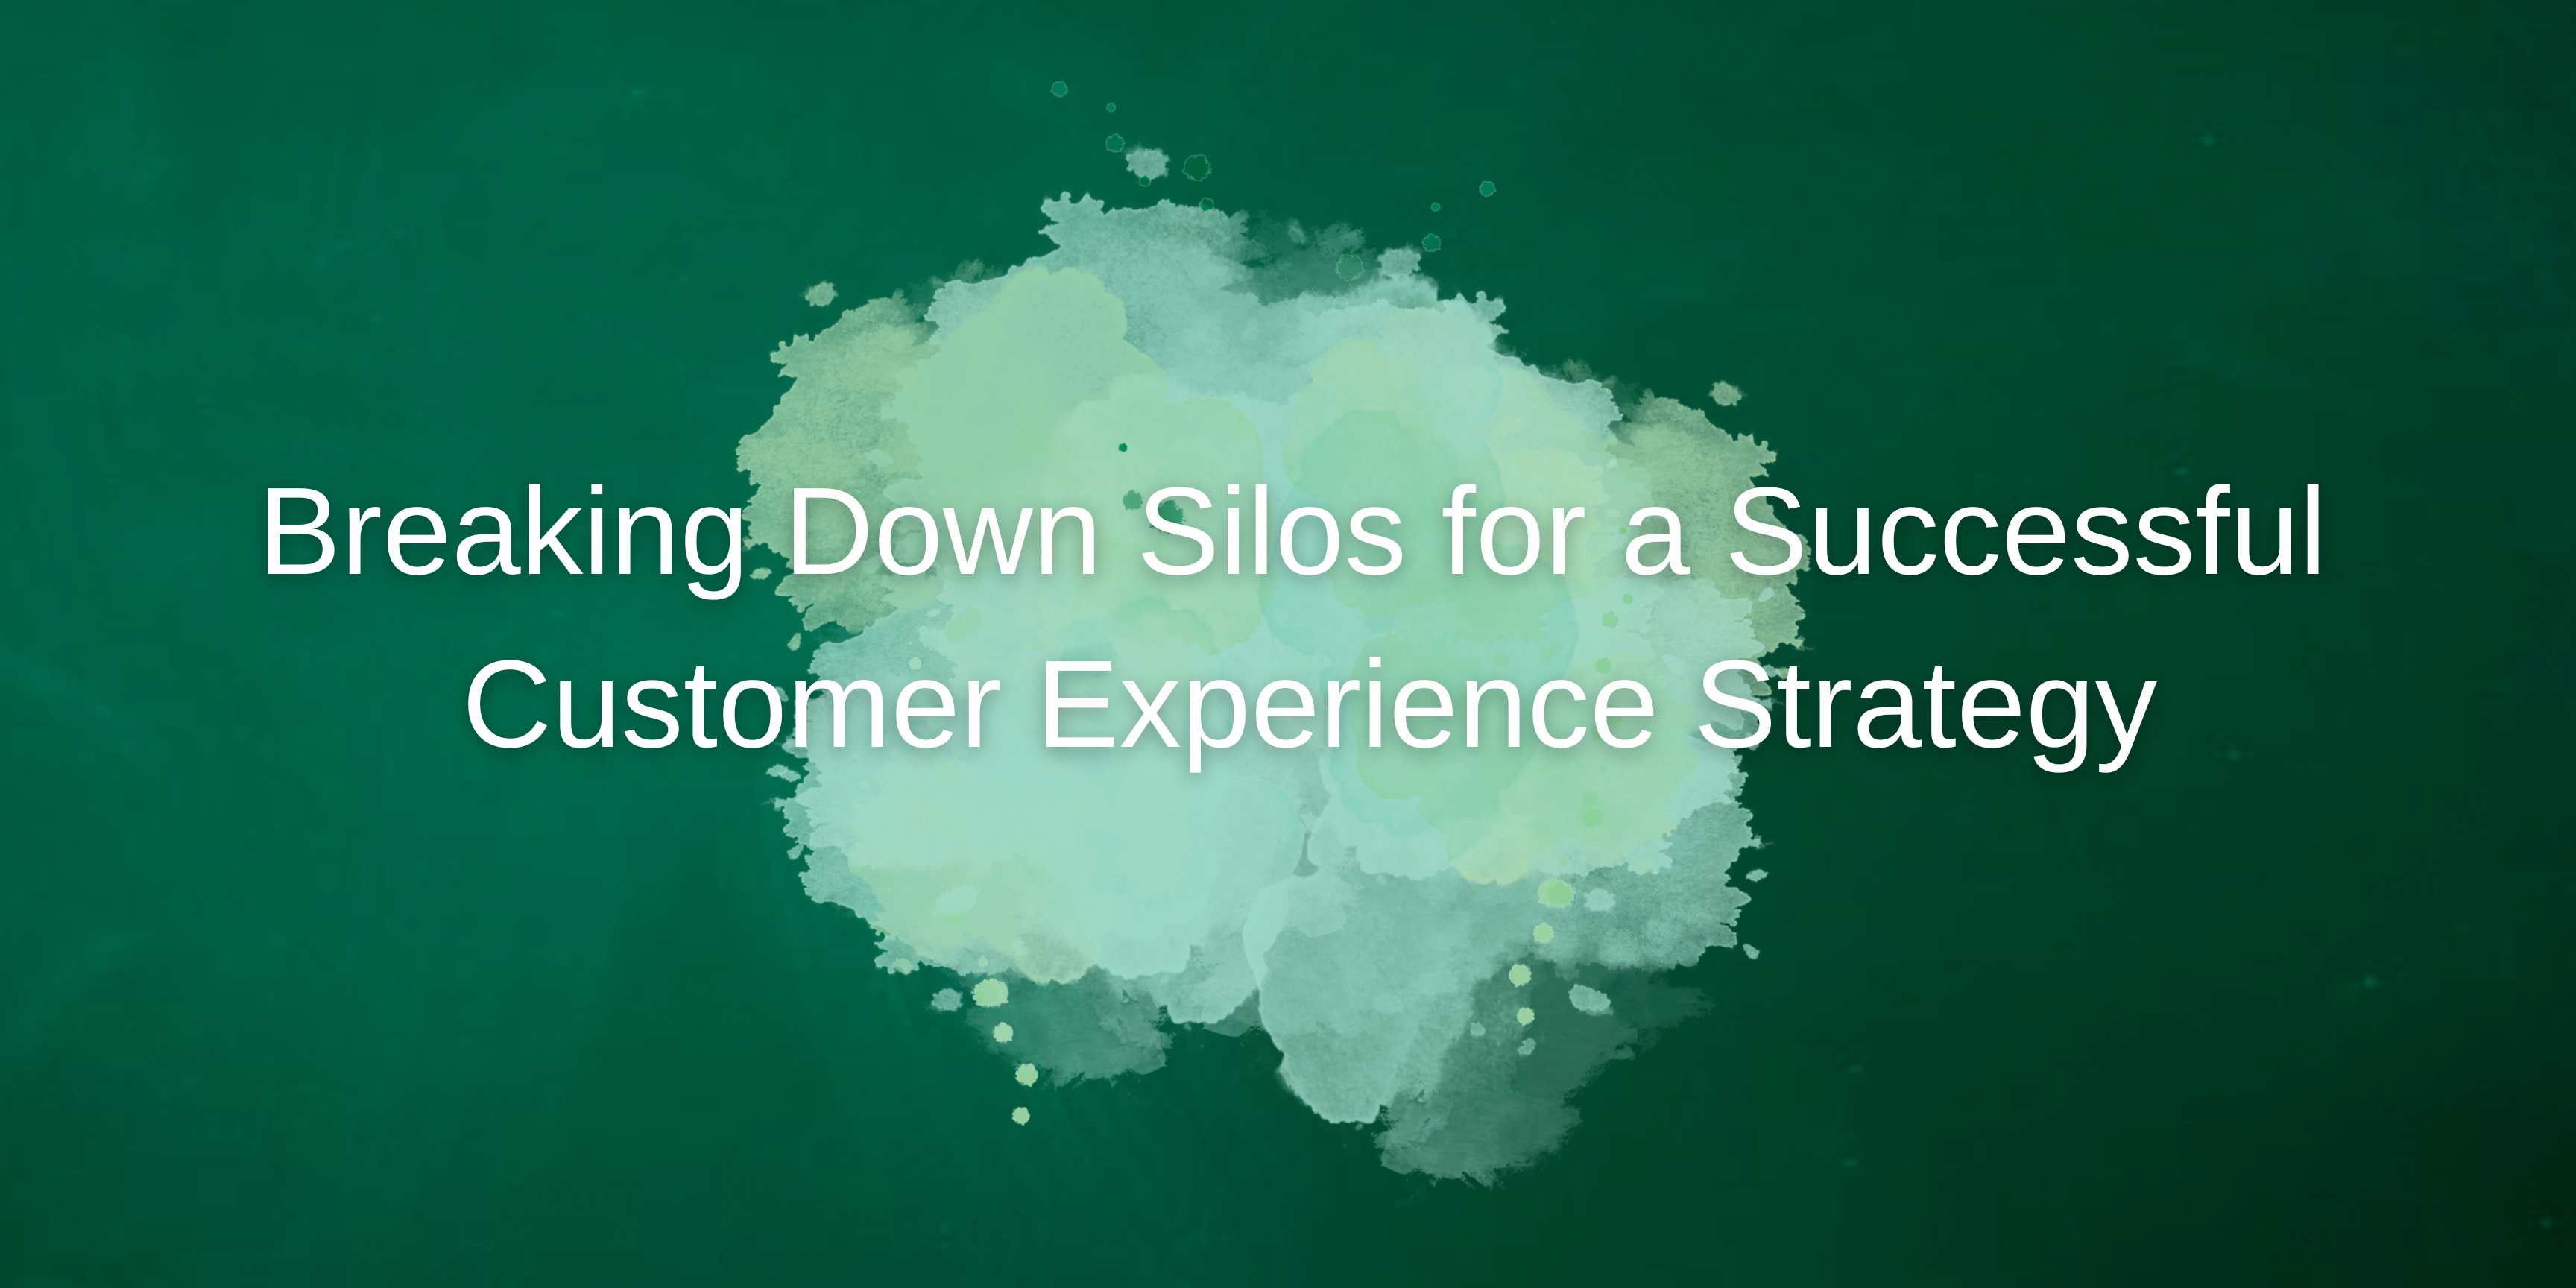 Breaking Down Silos for a Successful Customer Experience Strategy